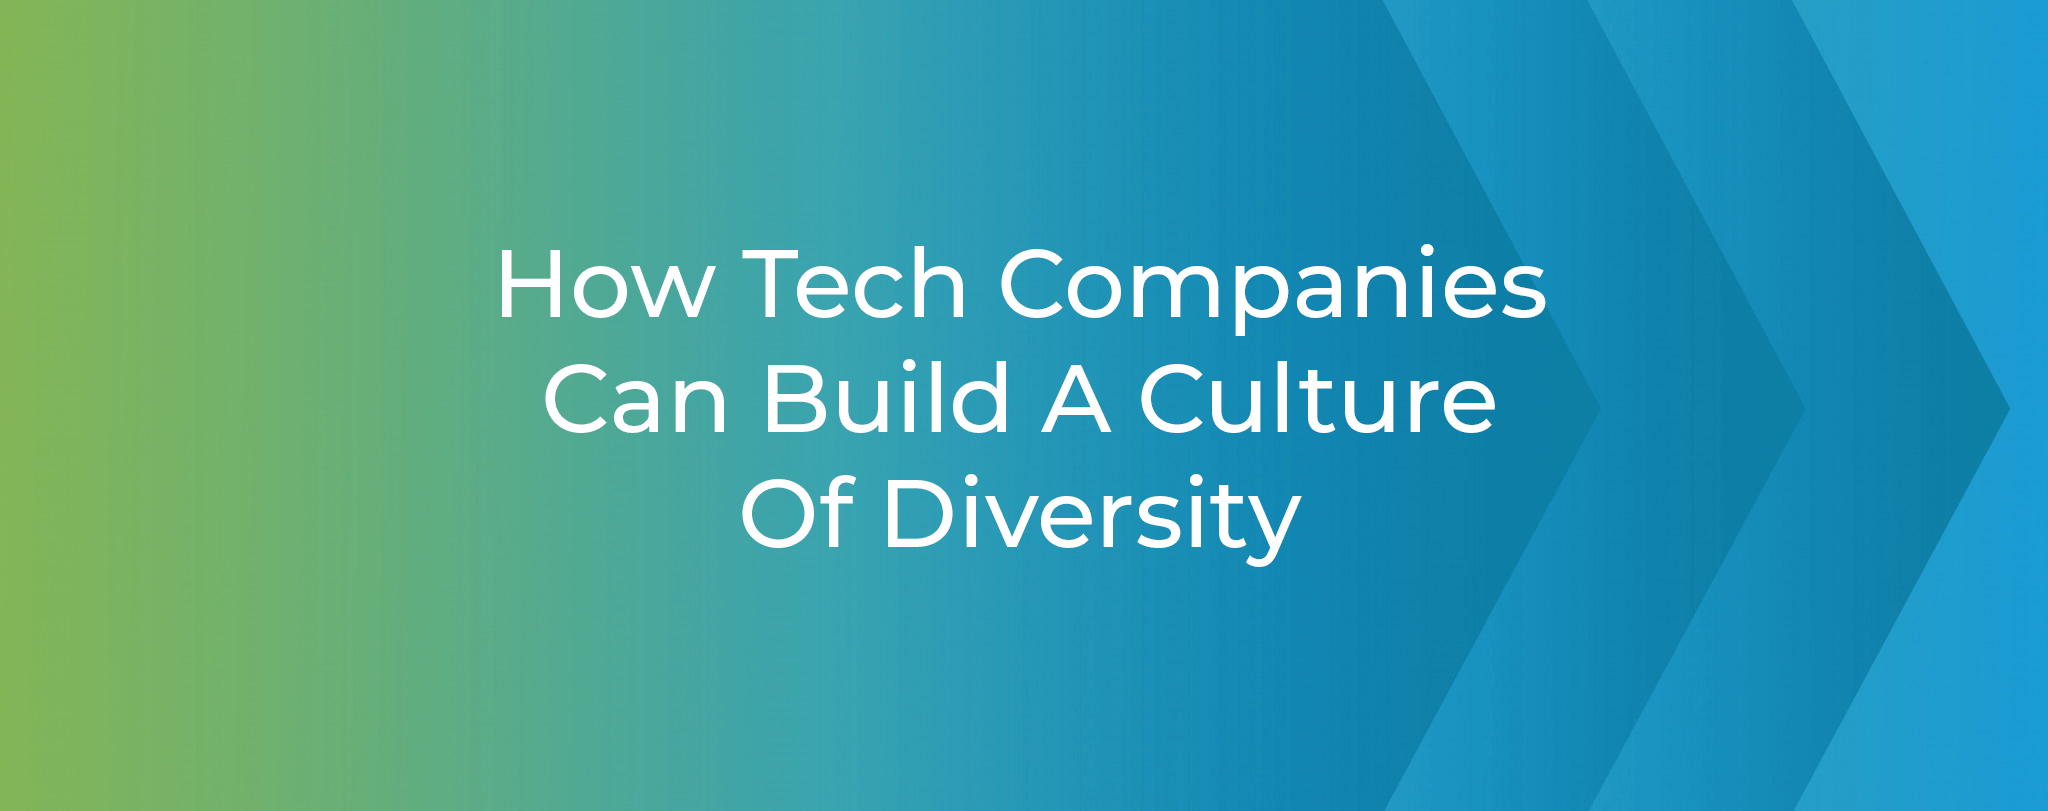 How Tech Companies Can Build A Culture Of Diversity